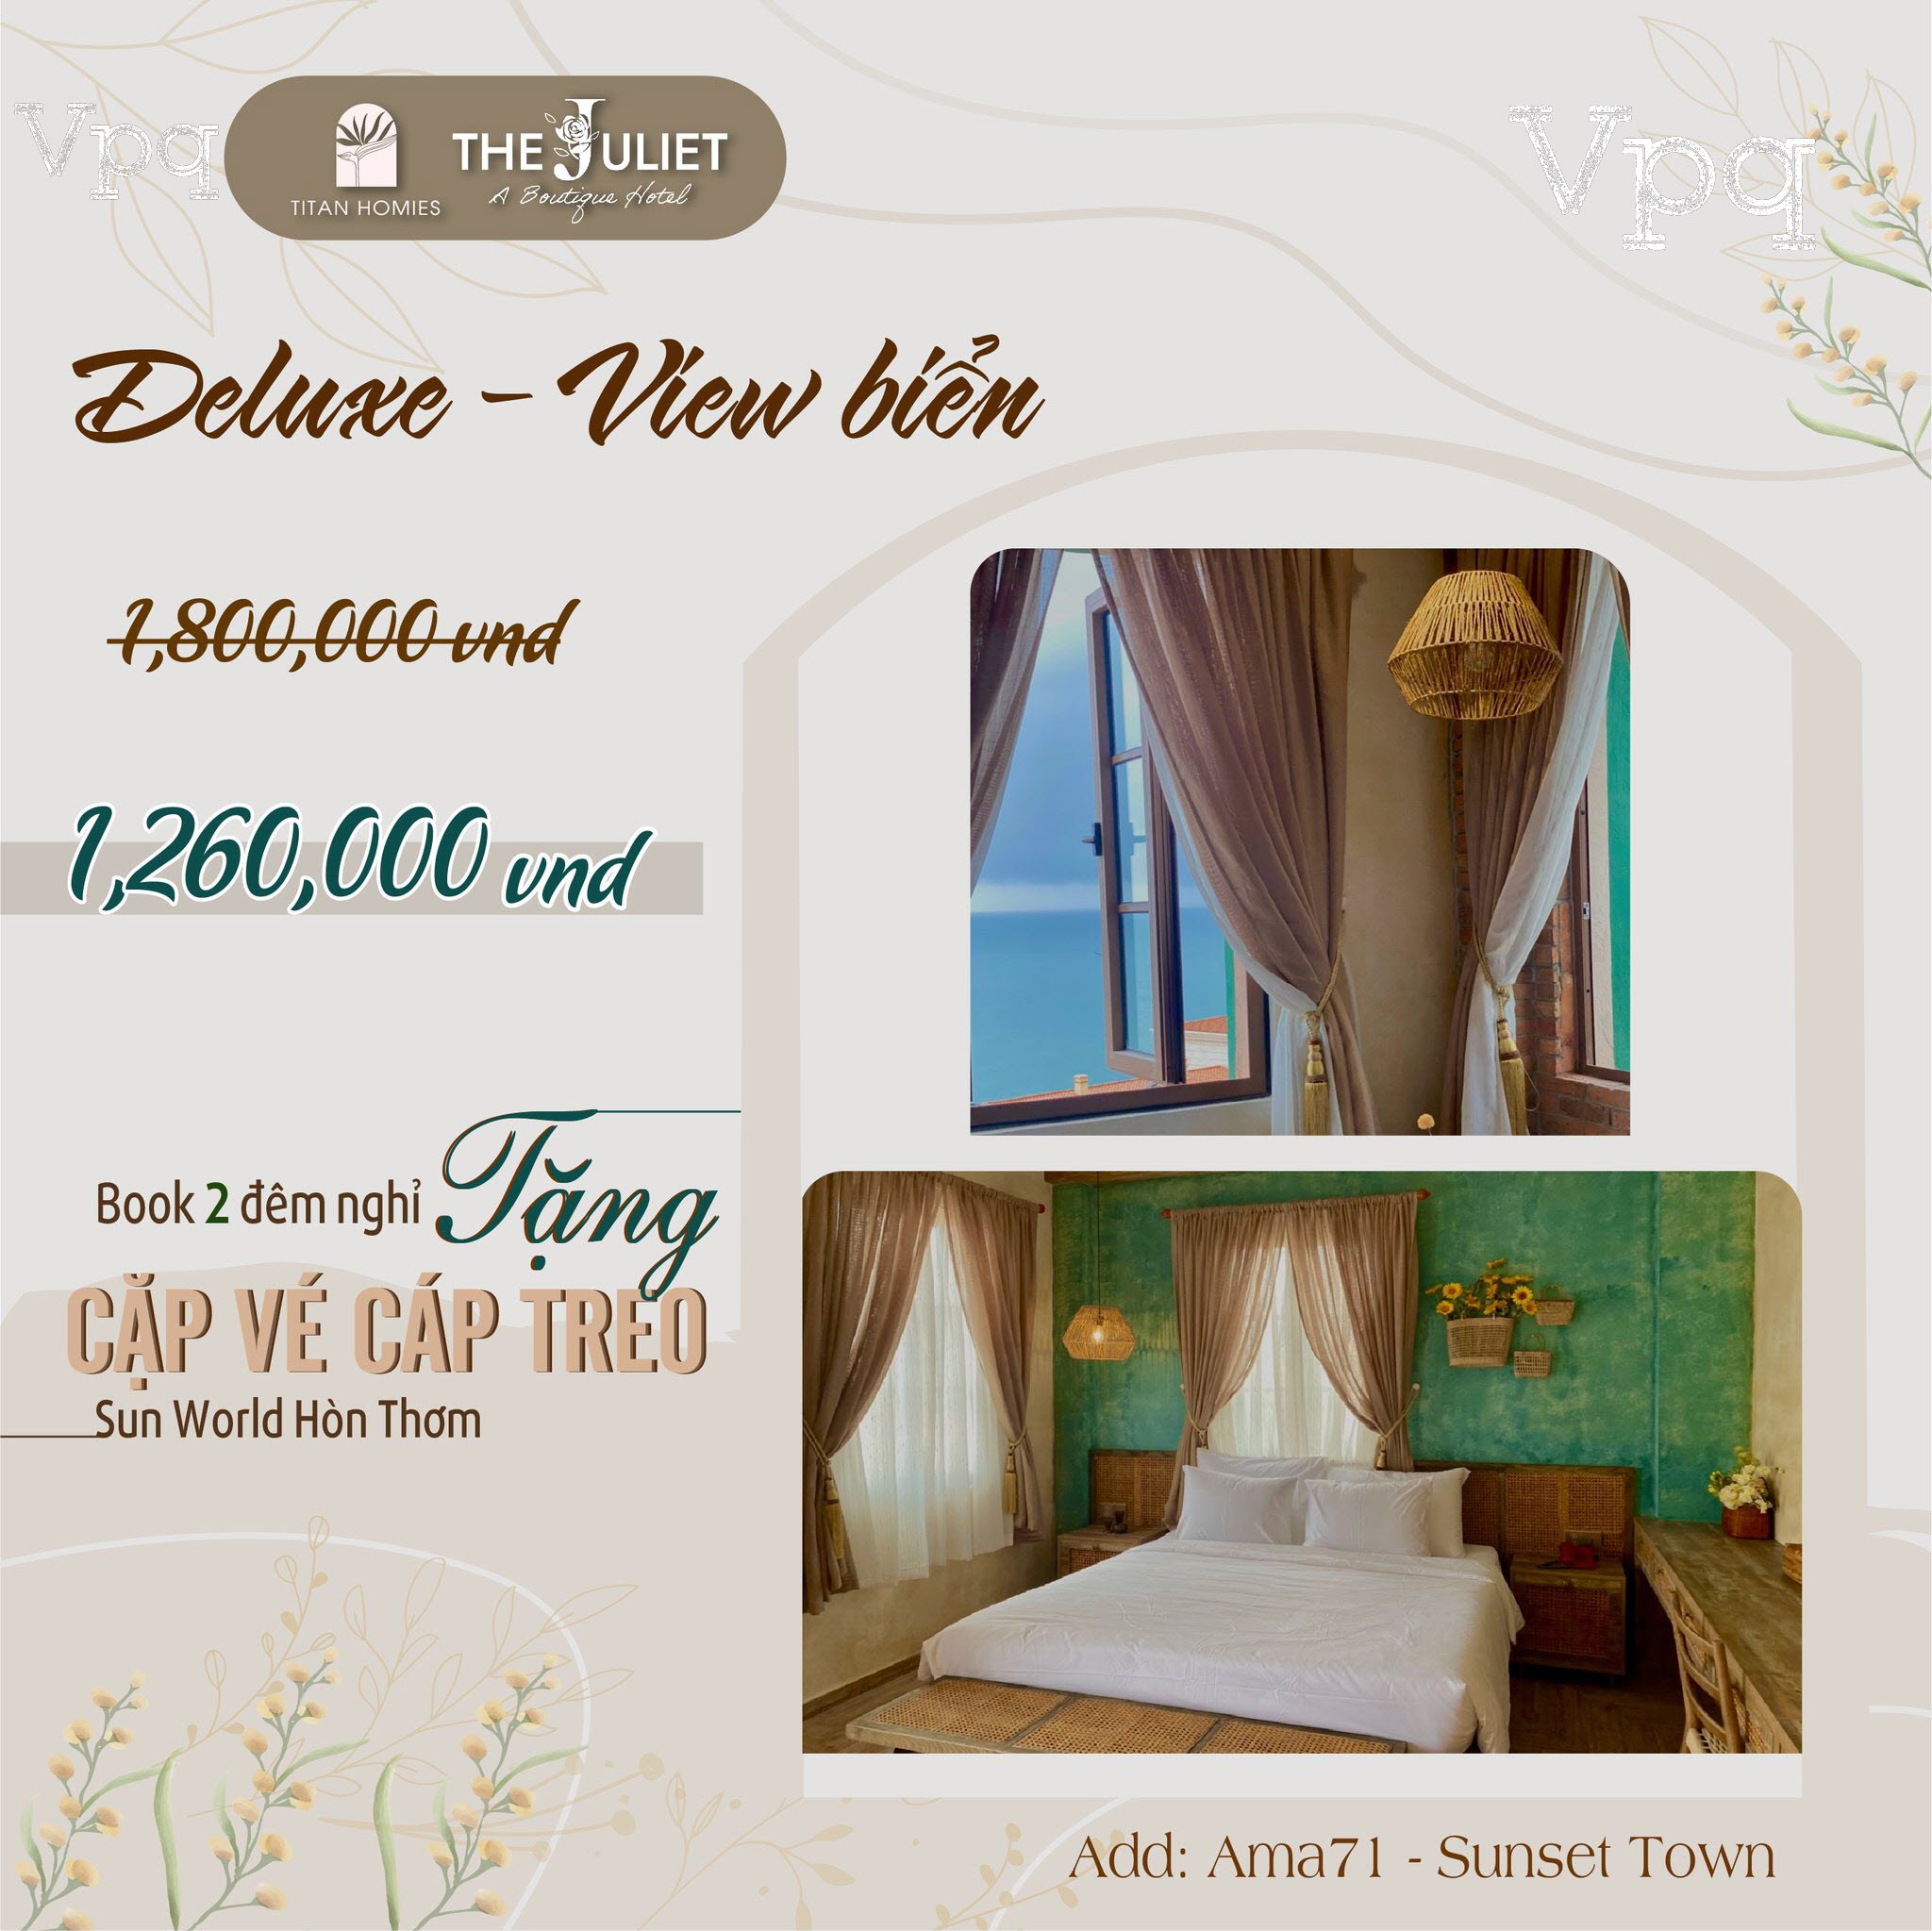 Deluxe View Biển